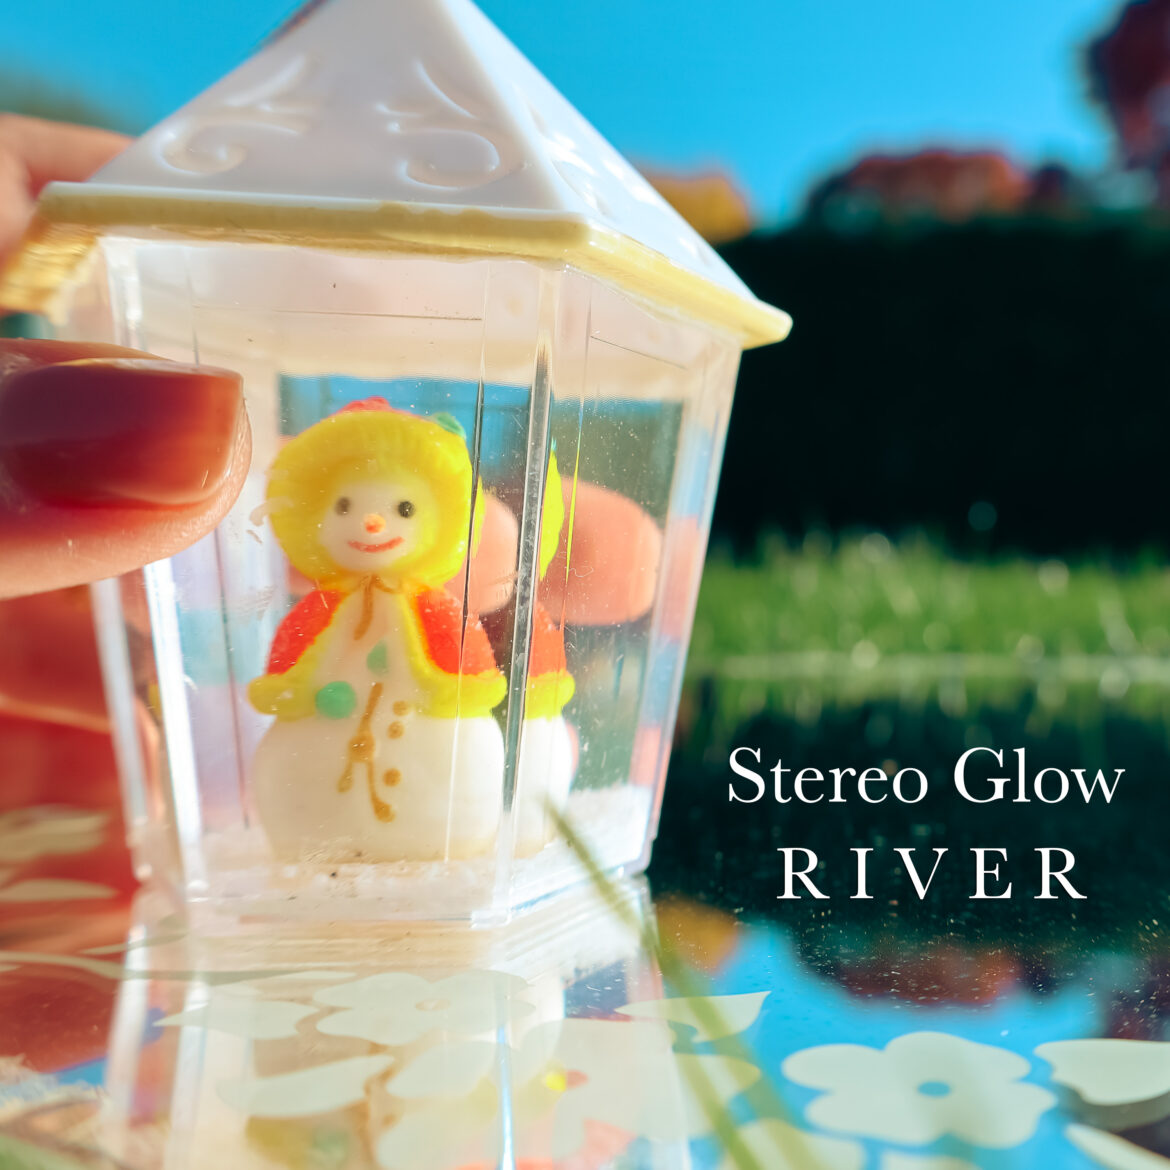 Emerging Melodic Rock Duo Stereo Glow Gift Fans With New Single As Part Of Charity Initiative